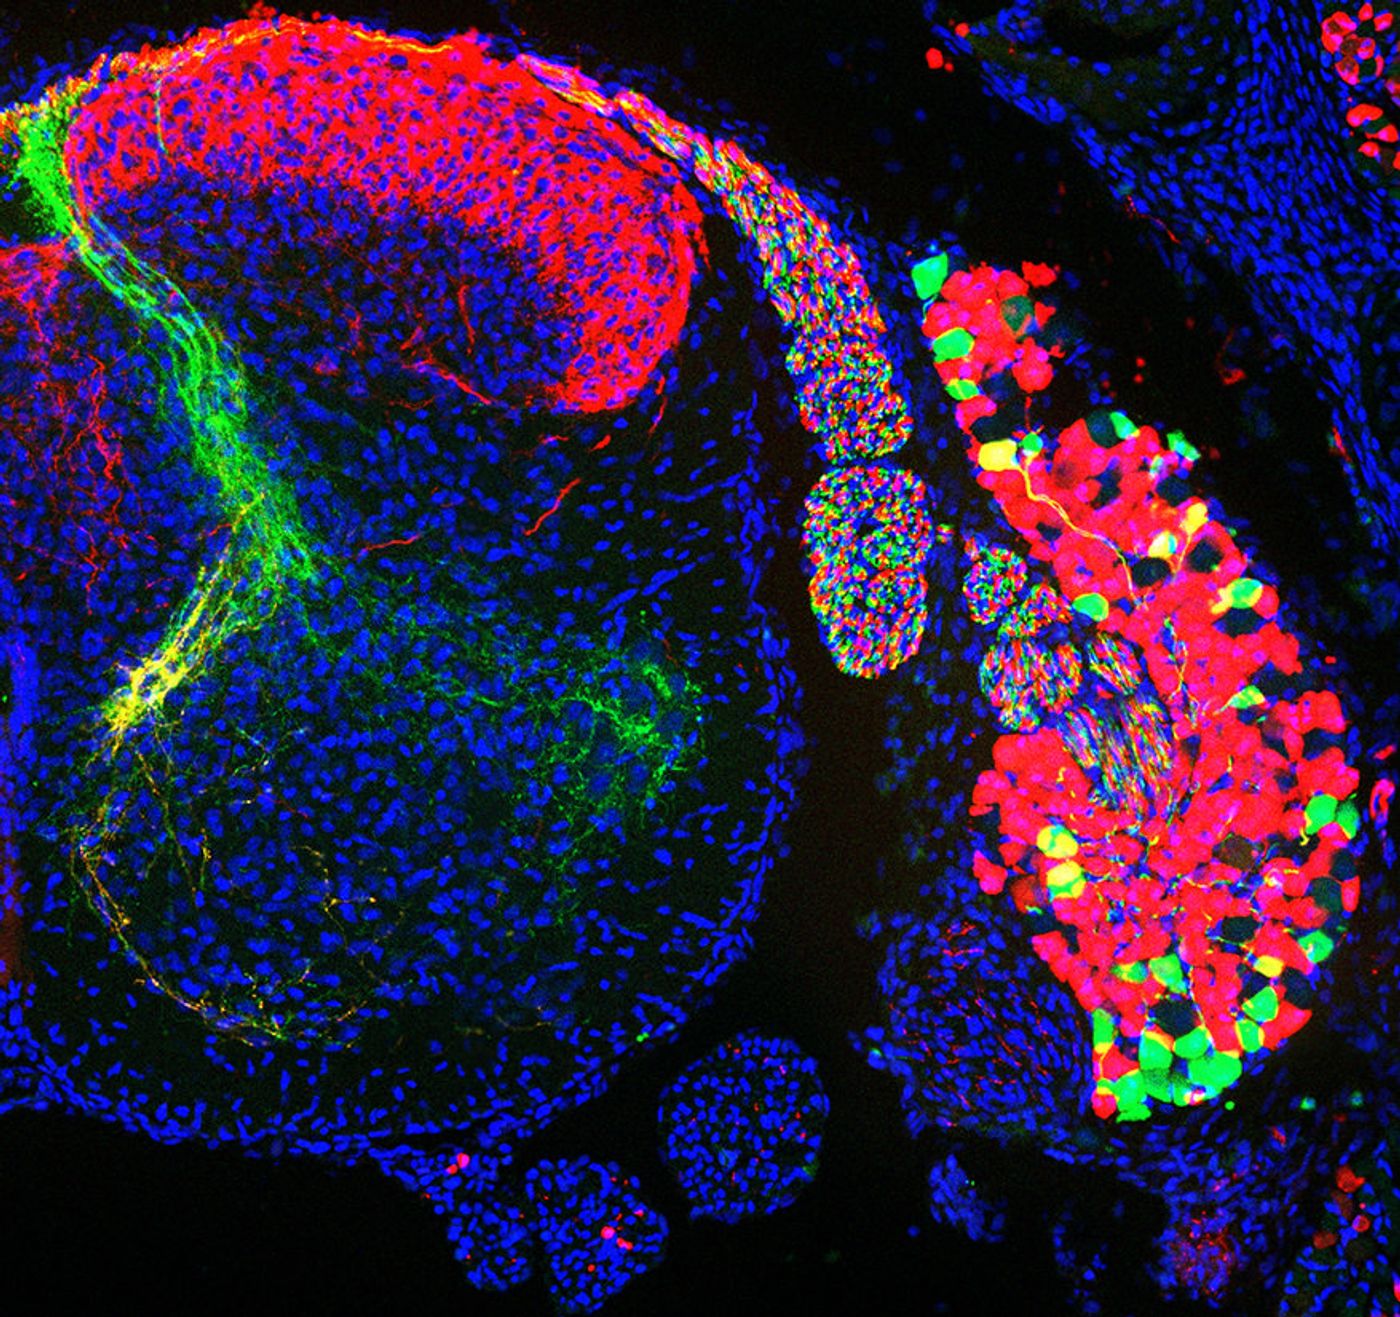 The cell bodies of sensory neurons that detect proprioceptive information (green) and that detect thermal and tactile information (red) in a dorsal root ganglion (right) and their axons in the spinal cord (left) / Image credit: Stephan Dietrich, Zampieri Lab, Max Delbrück Center